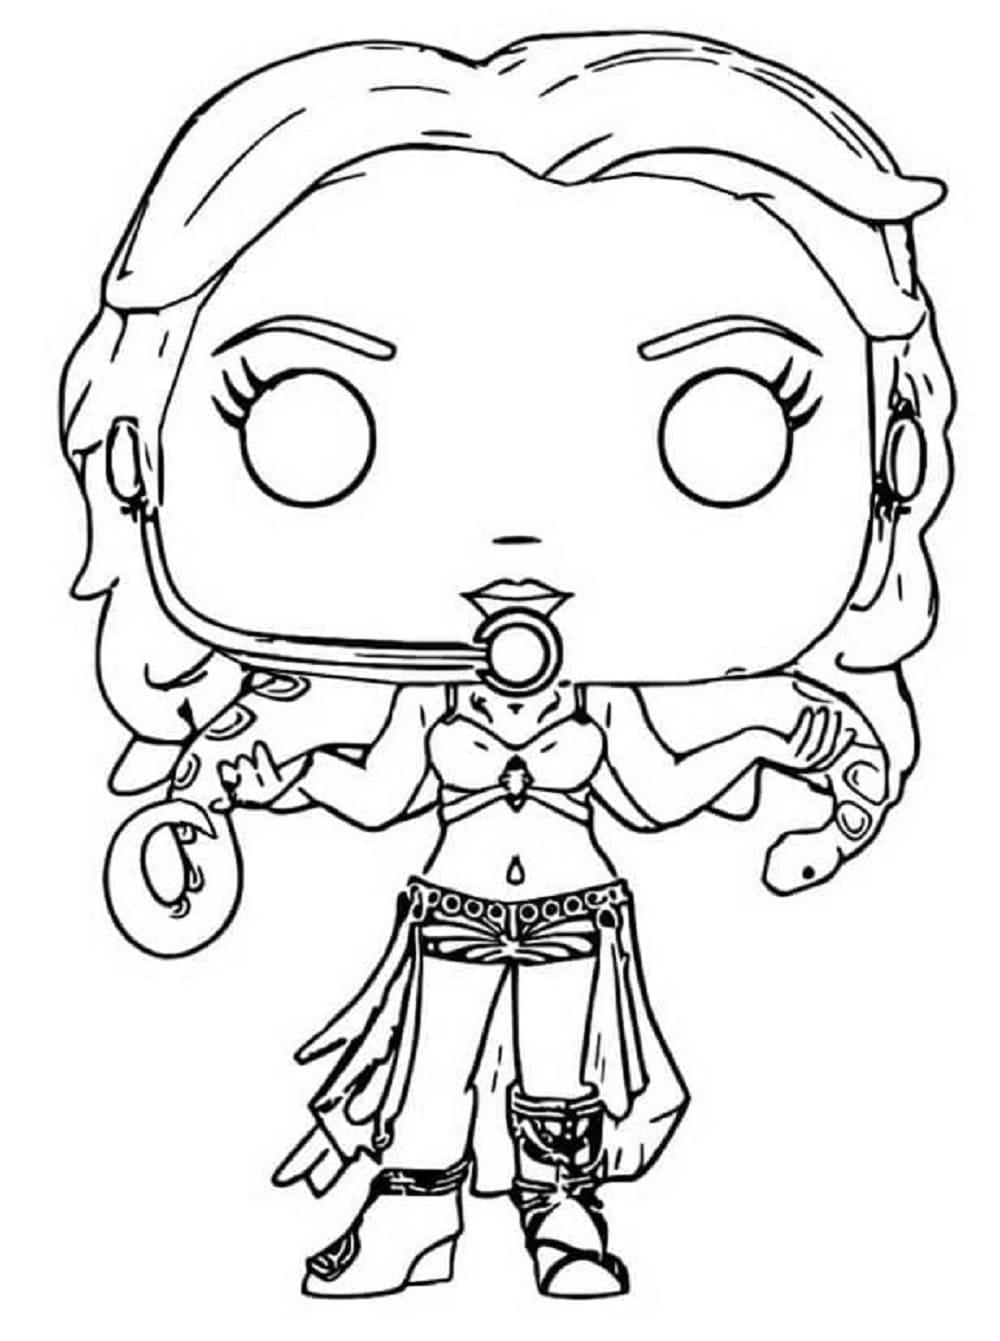 Printable Funko Pop Britney Spears Coloring Page